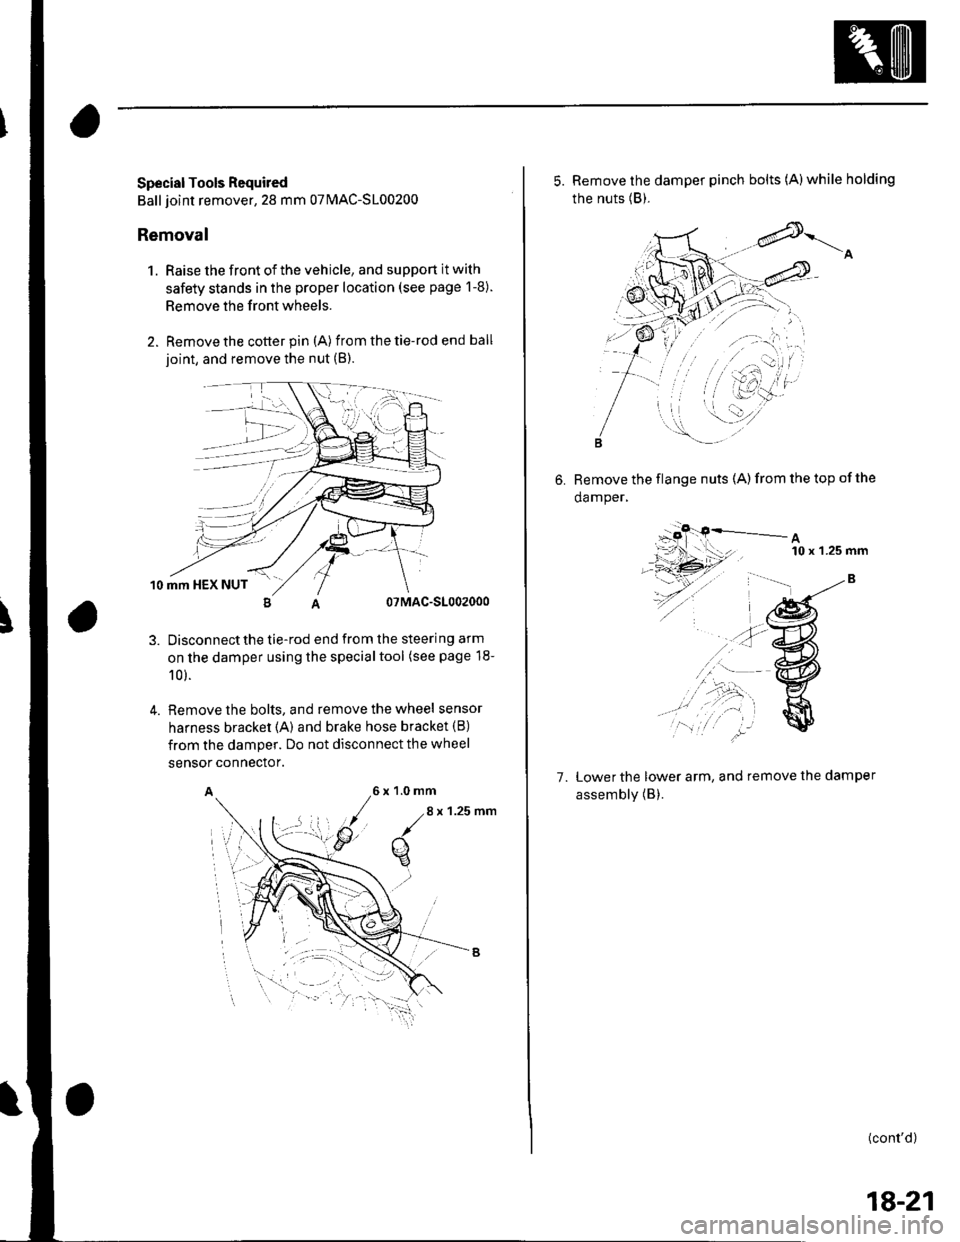 HONDA CIVIC 2002 7.G Service Manual Special Tools Required
Ball joint remover,28 mm 07MAC-S100200
Removal
1. Raise the front of the vehicle, and support it with
safety stands in the proper location (see page 1-8).
Remove the front wheel